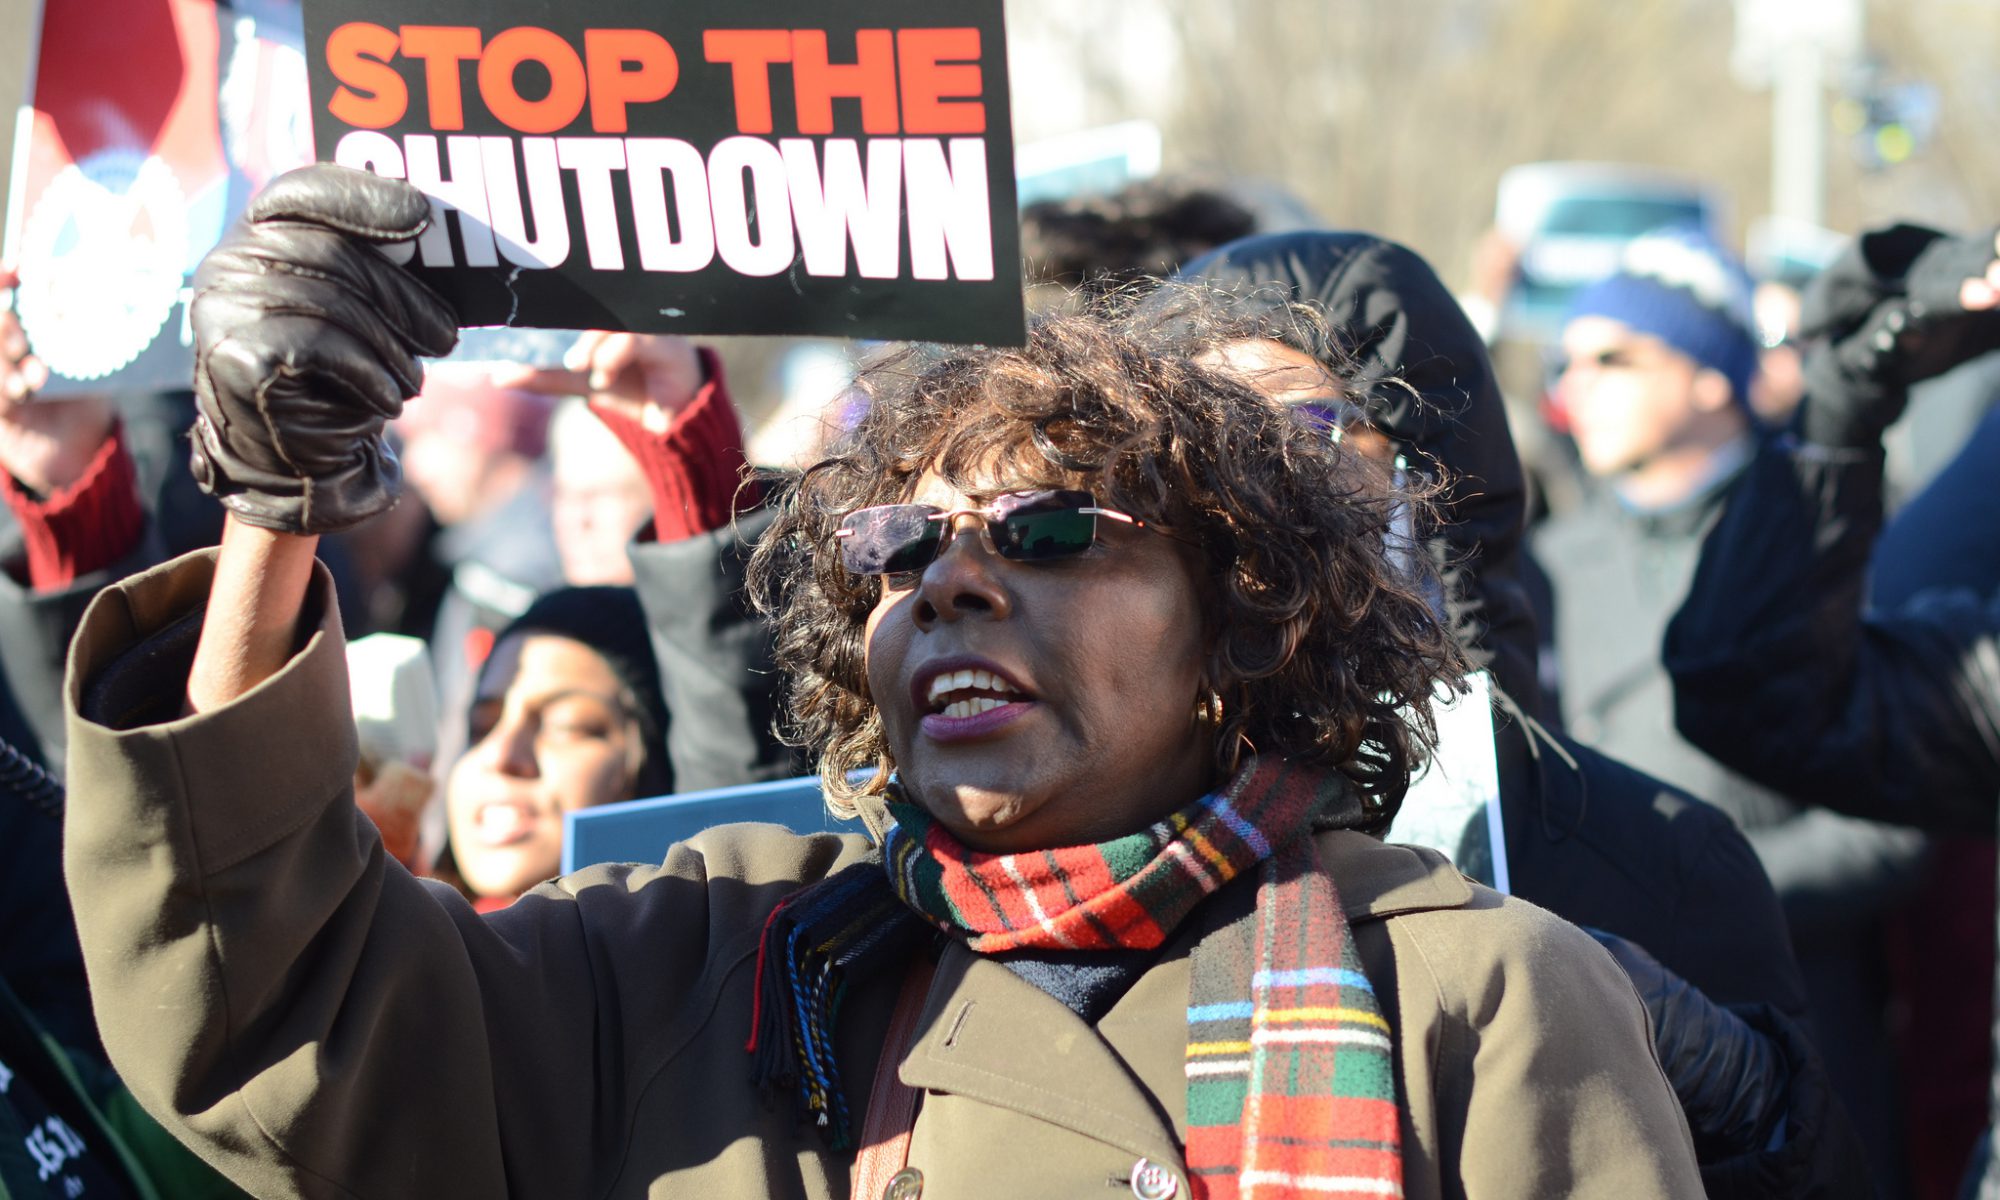 A woman holding a sign that says "stop the shutdown"